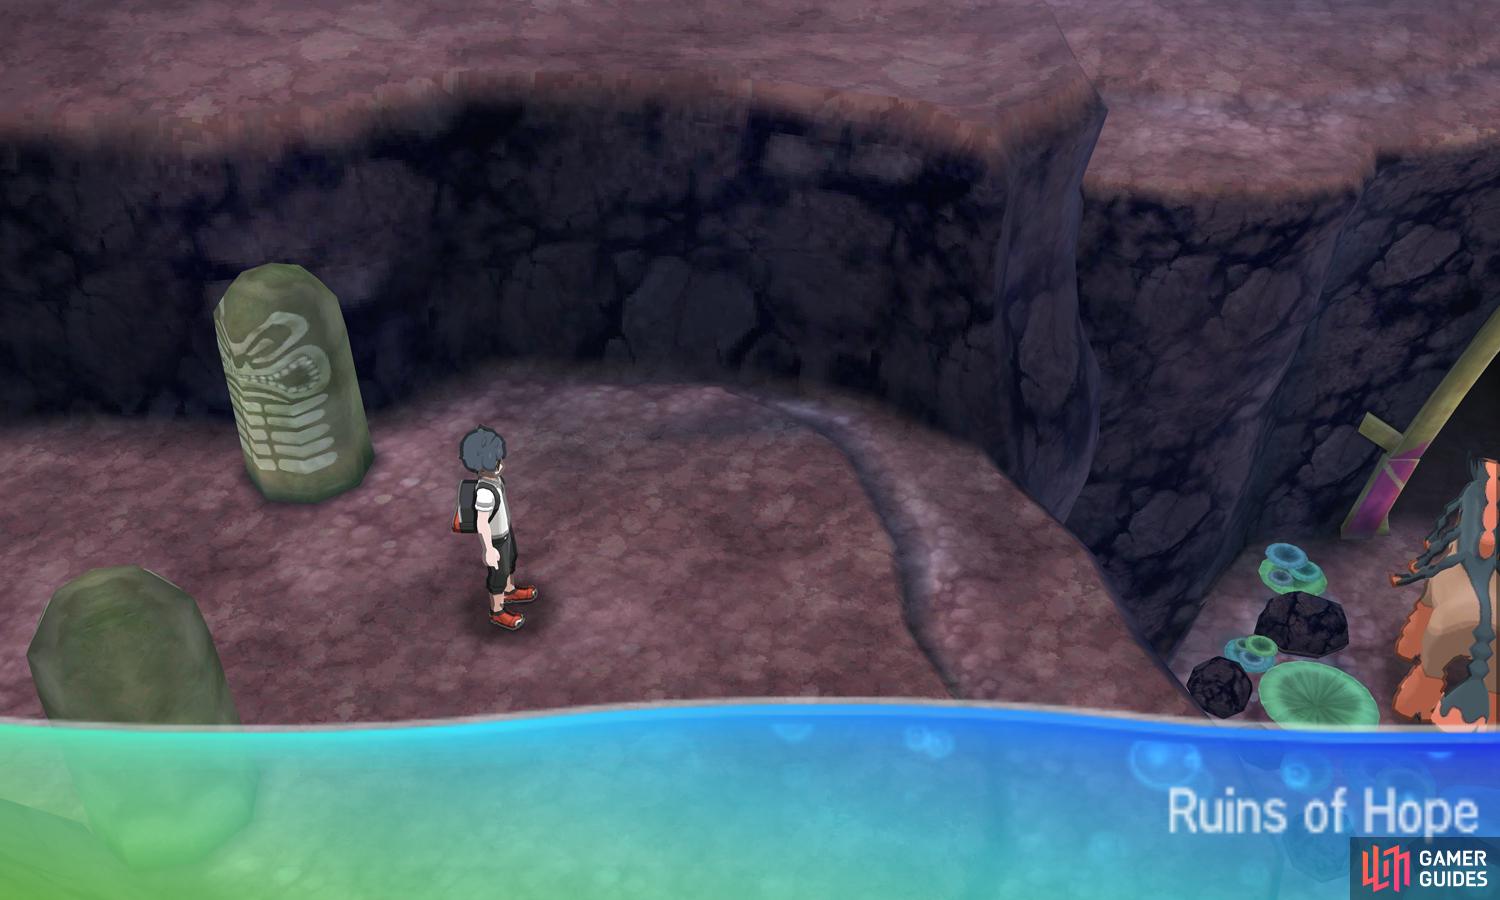 These ruins are home to Tapu Fini, the Water-type guardian.